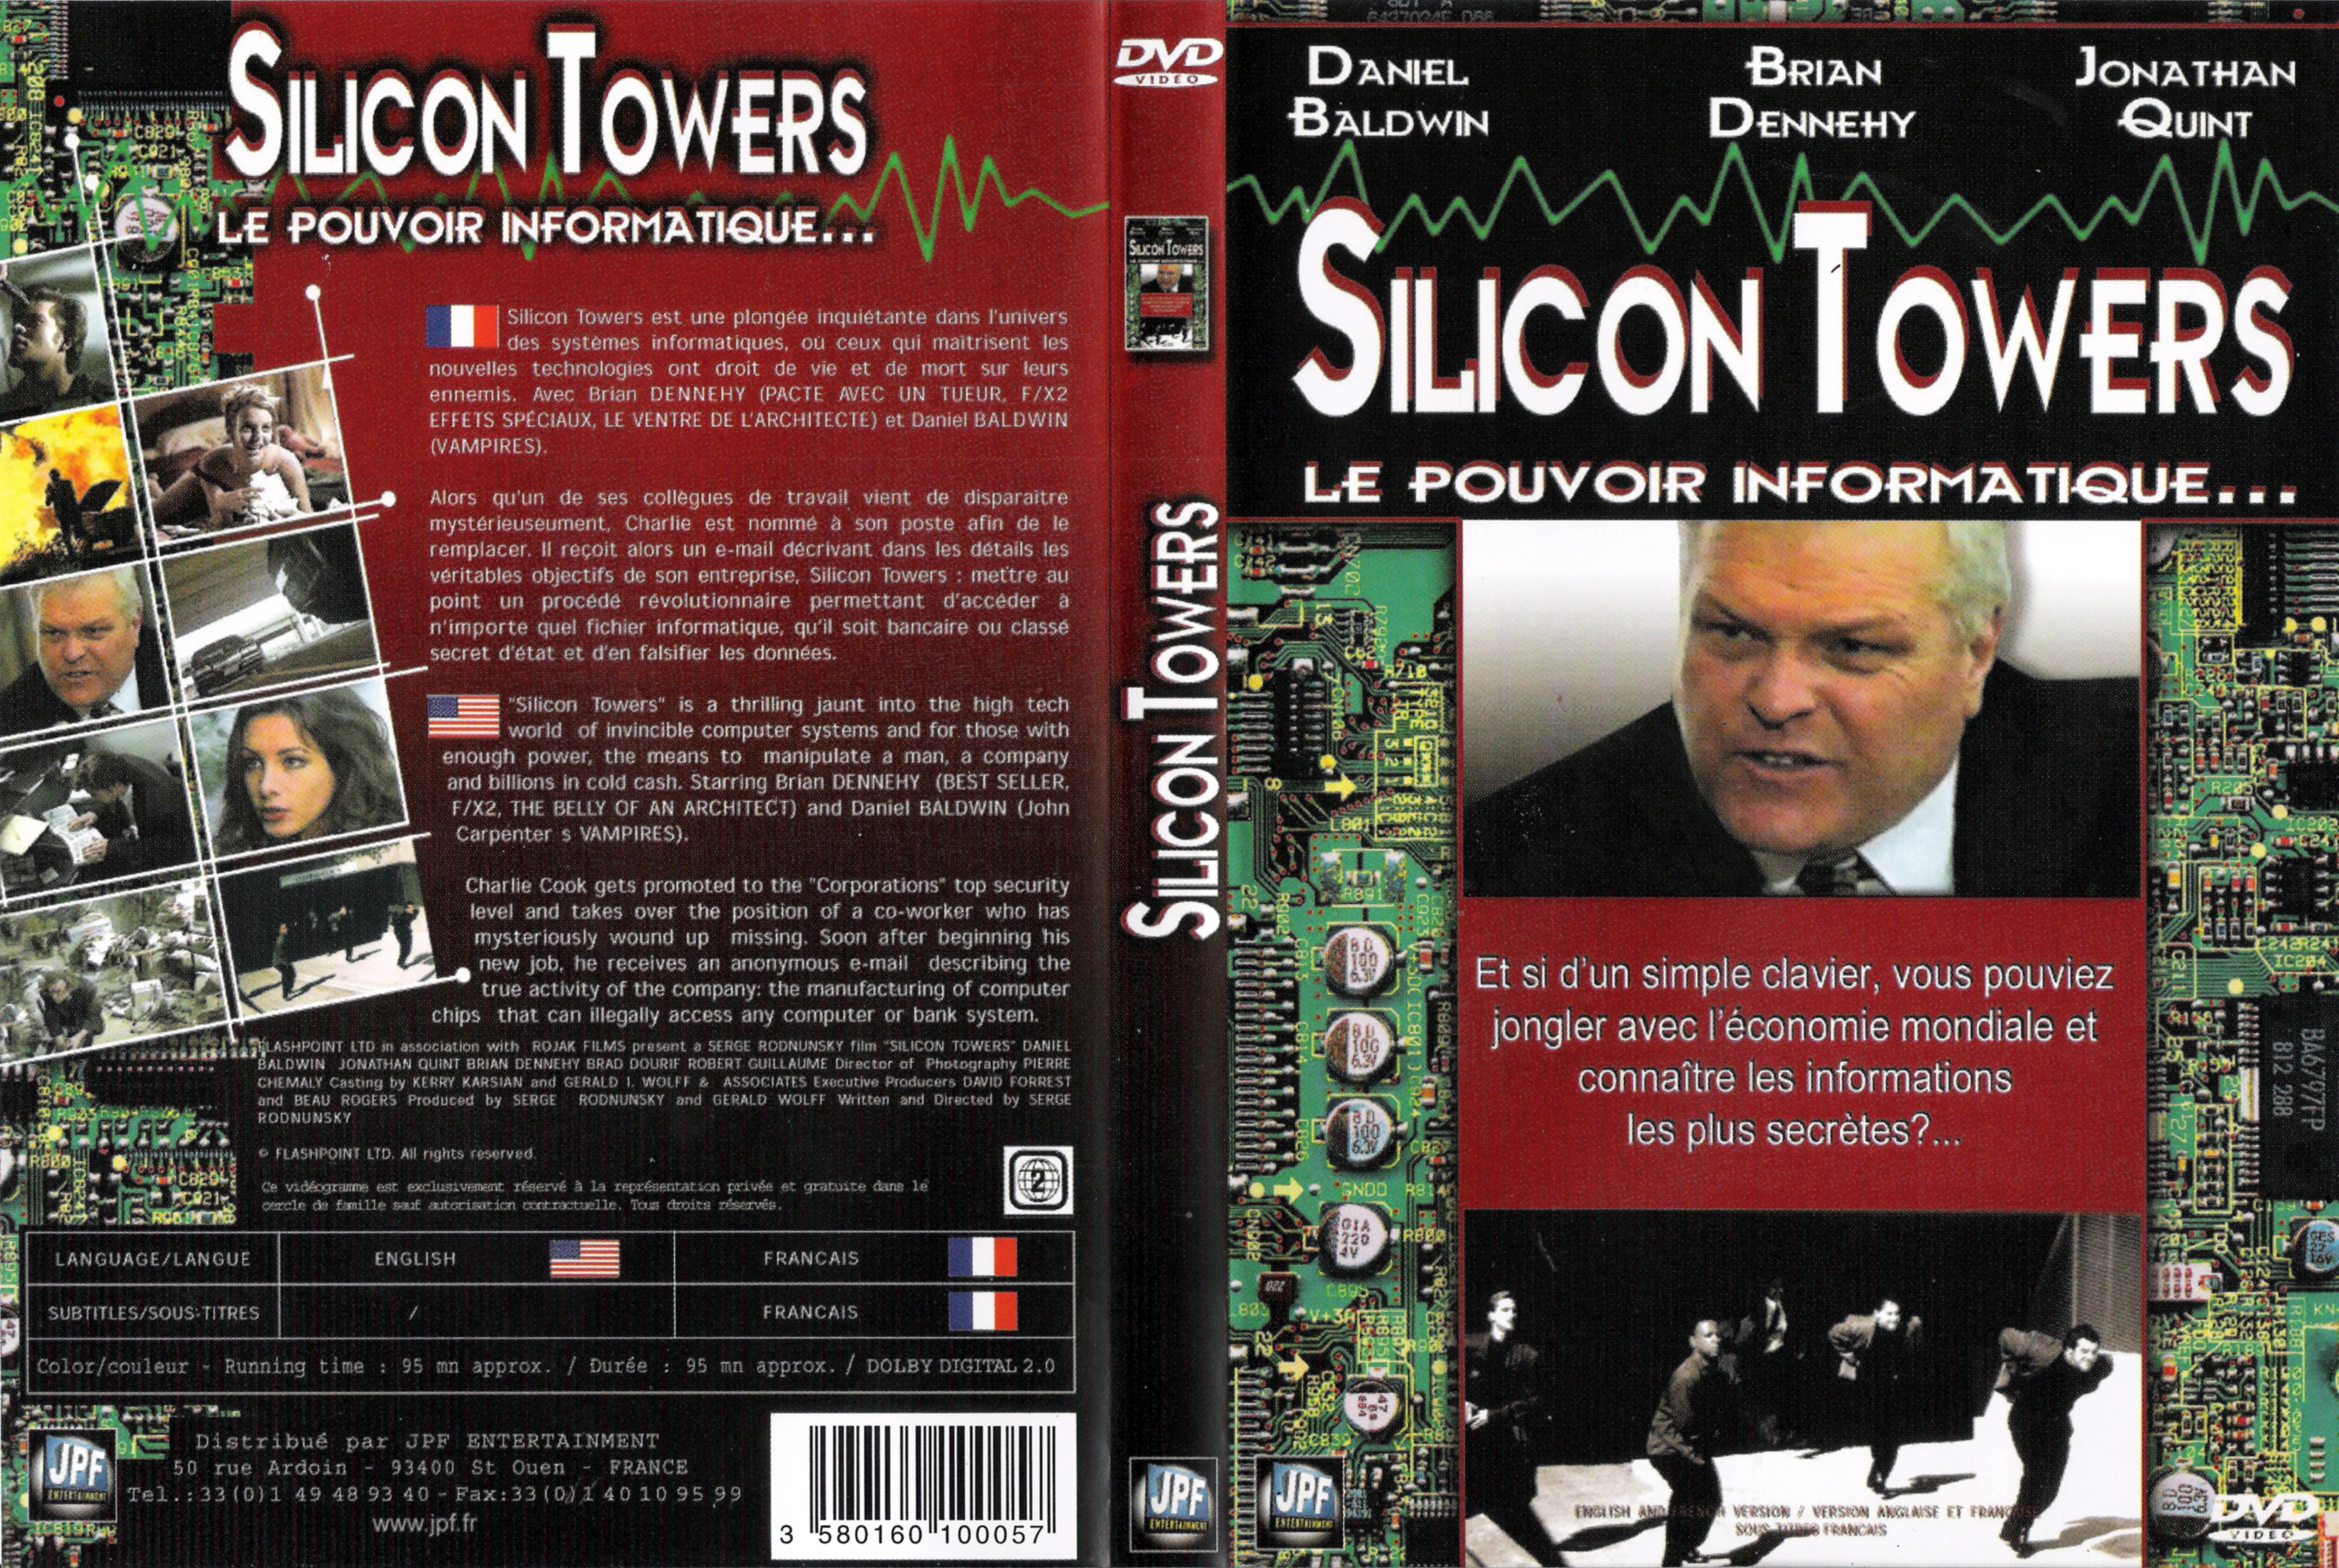 Jaquette DVD Silicon towers